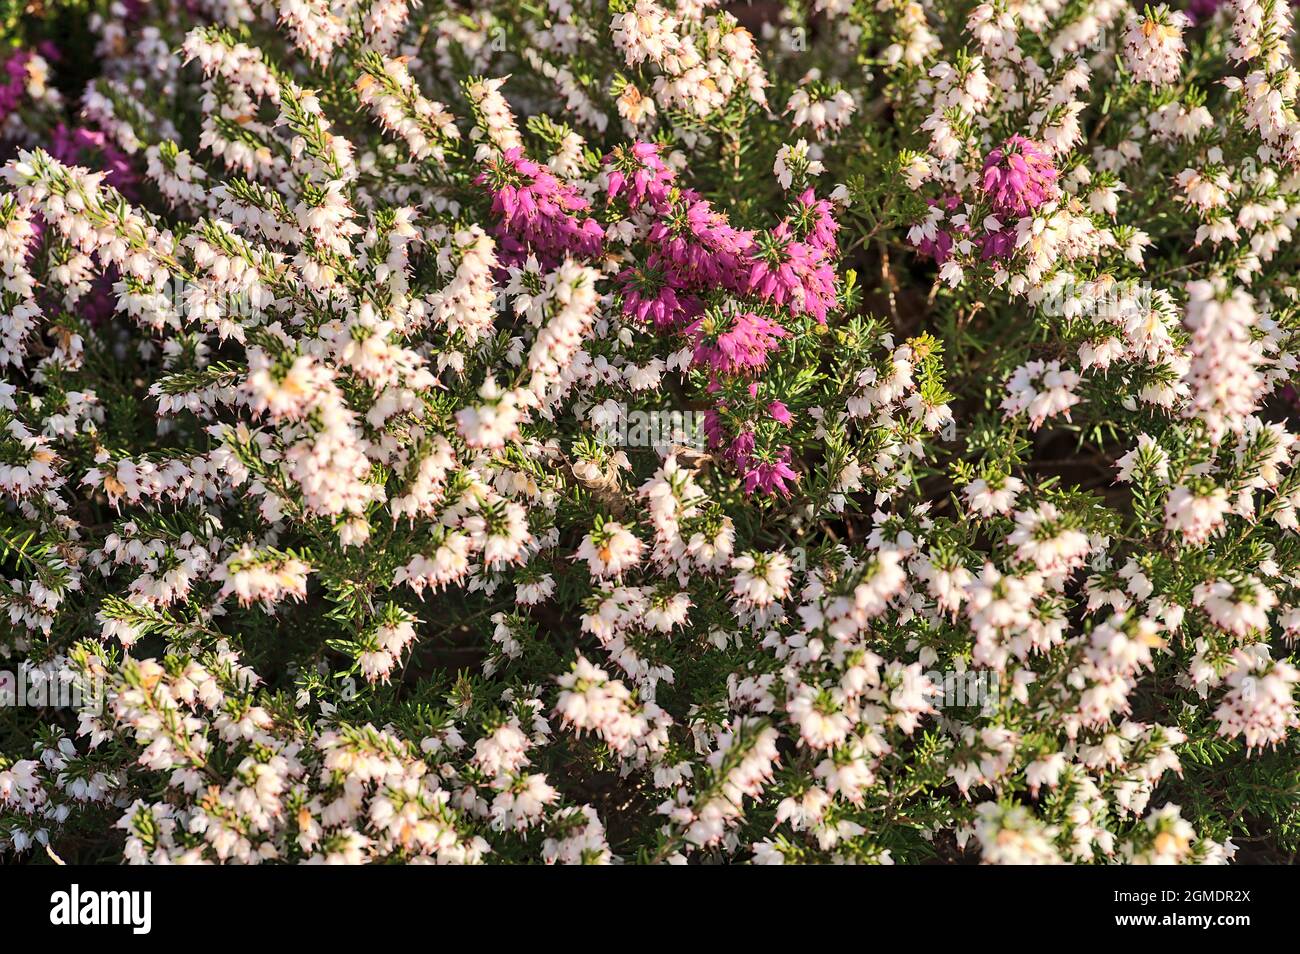 Beautiful spring background of mediterranean white and purple heath flowers (Erica Arborea) with green needle-like foliage growing and blooming Stock Photo